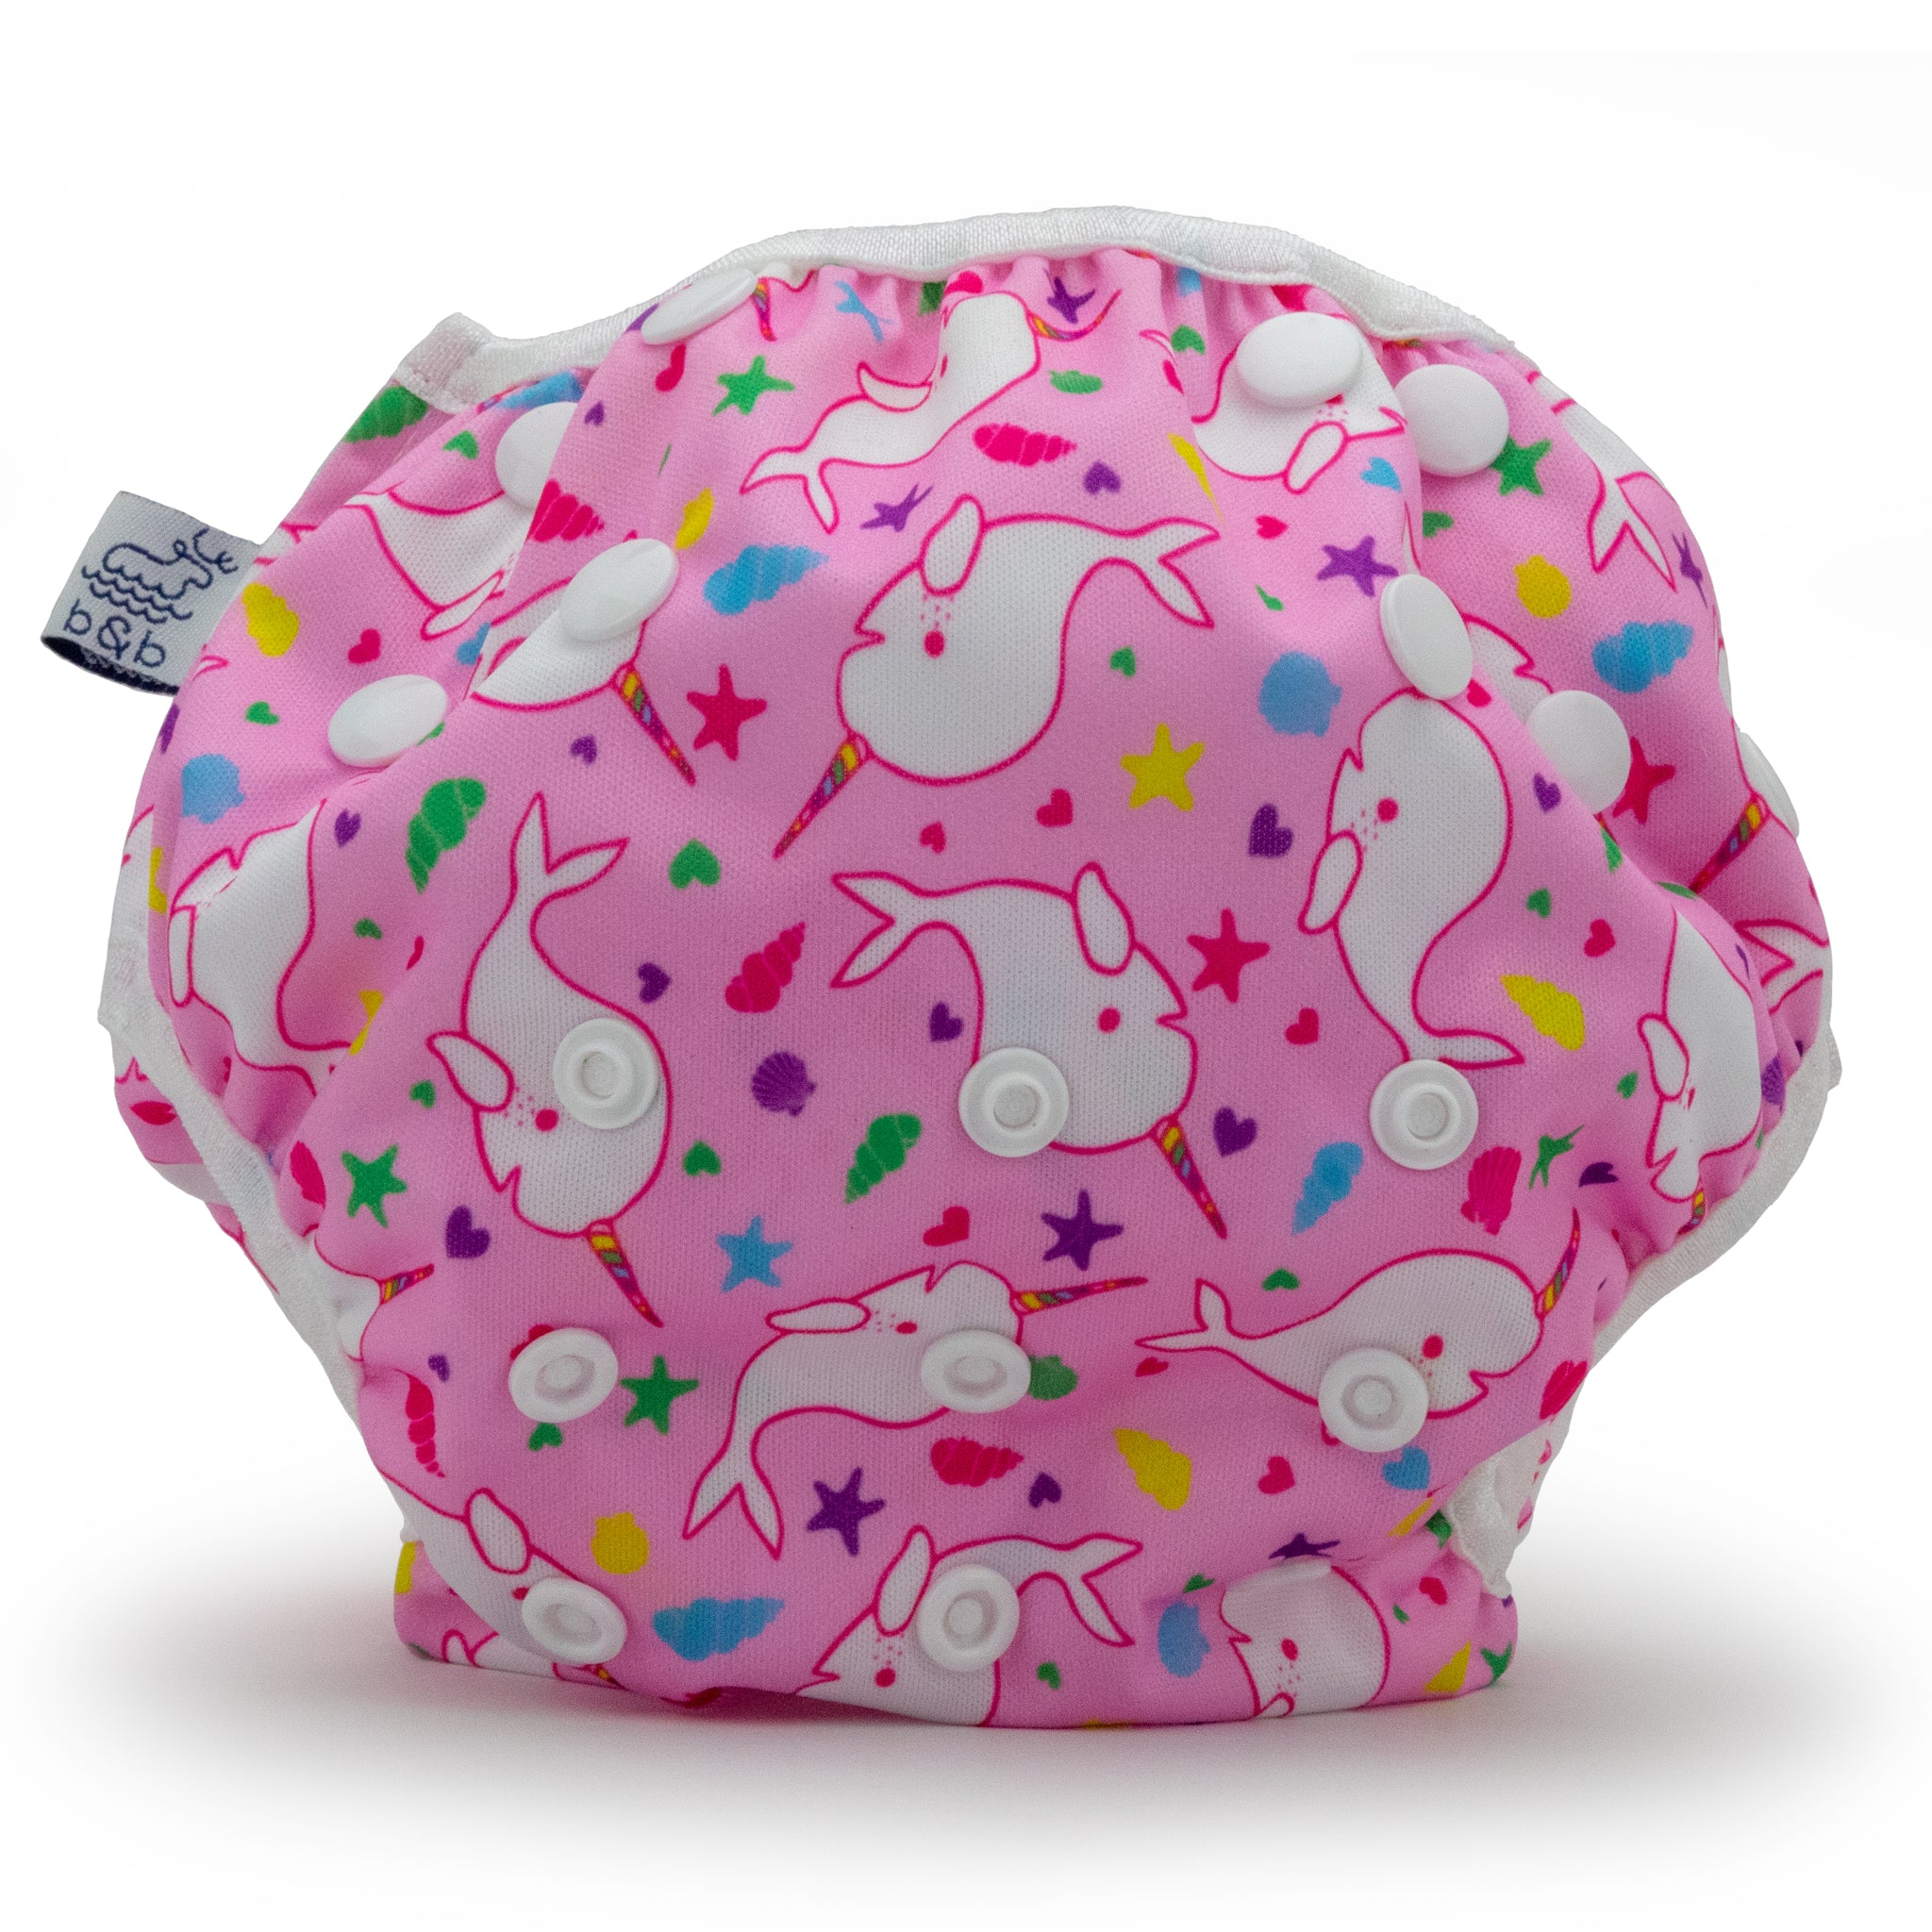 Reusable swim diaper with pink narhwal design, front view.